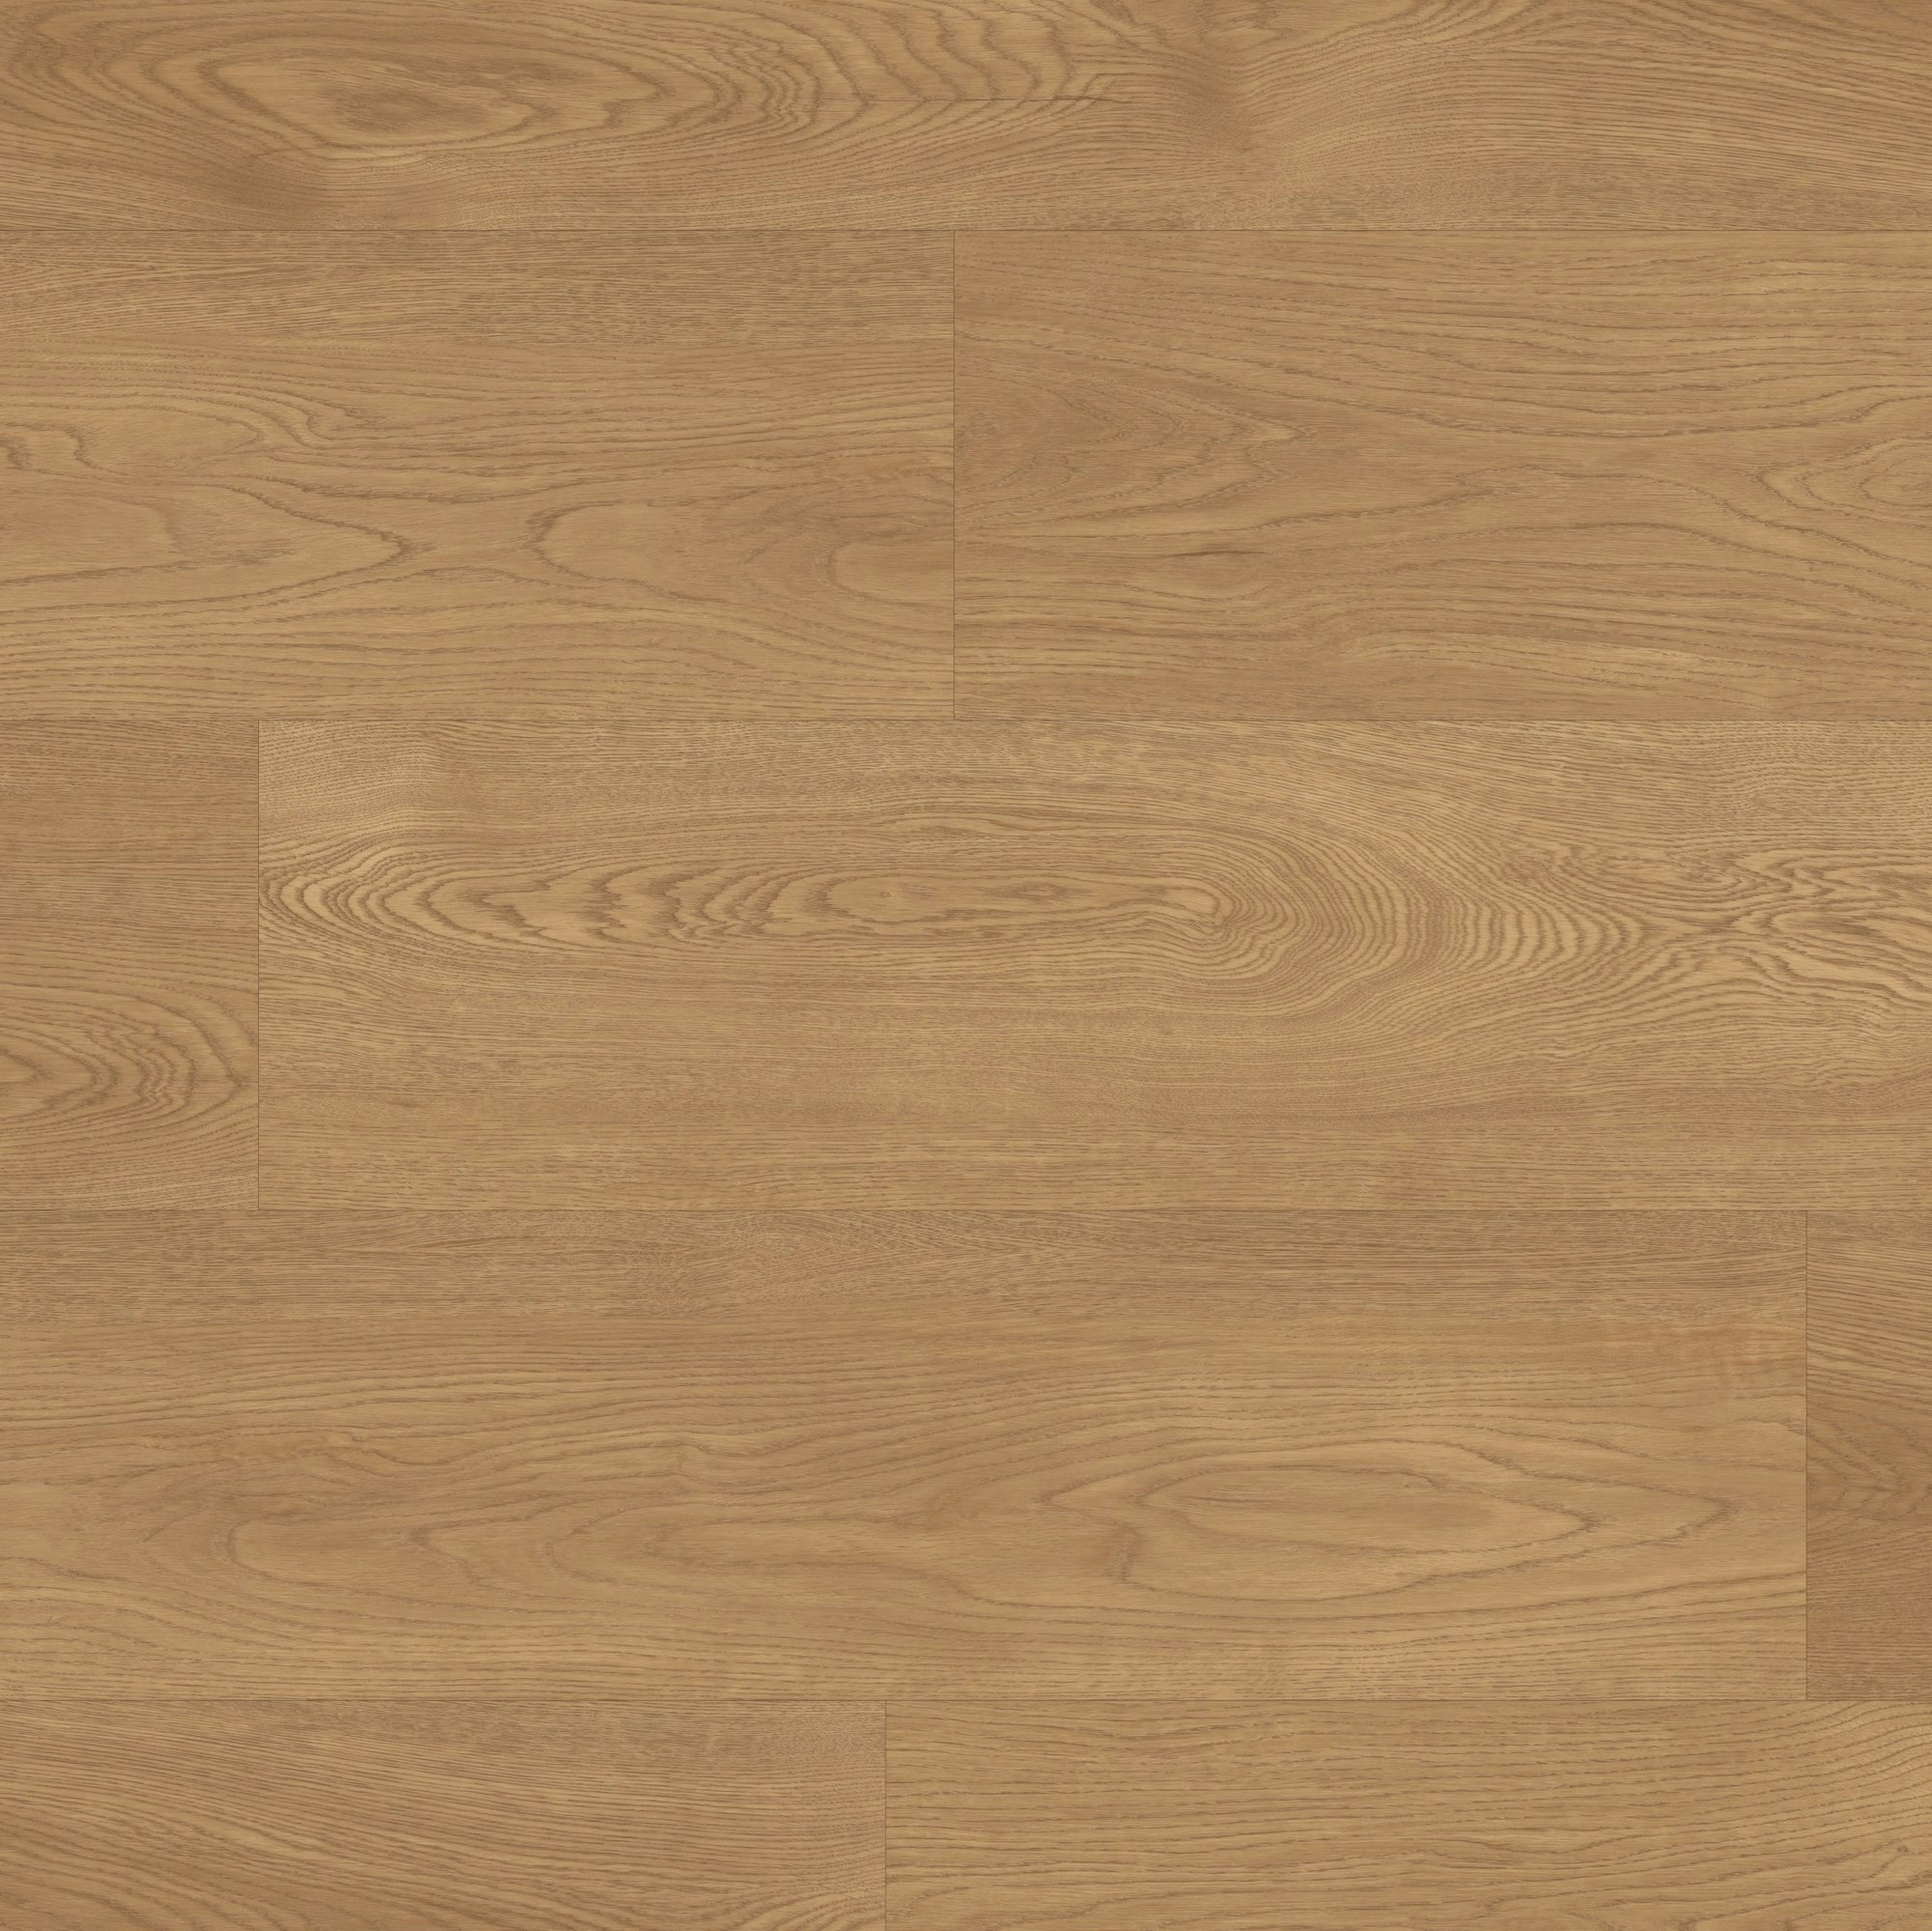 Torcello Palio Looselay LVT Pack